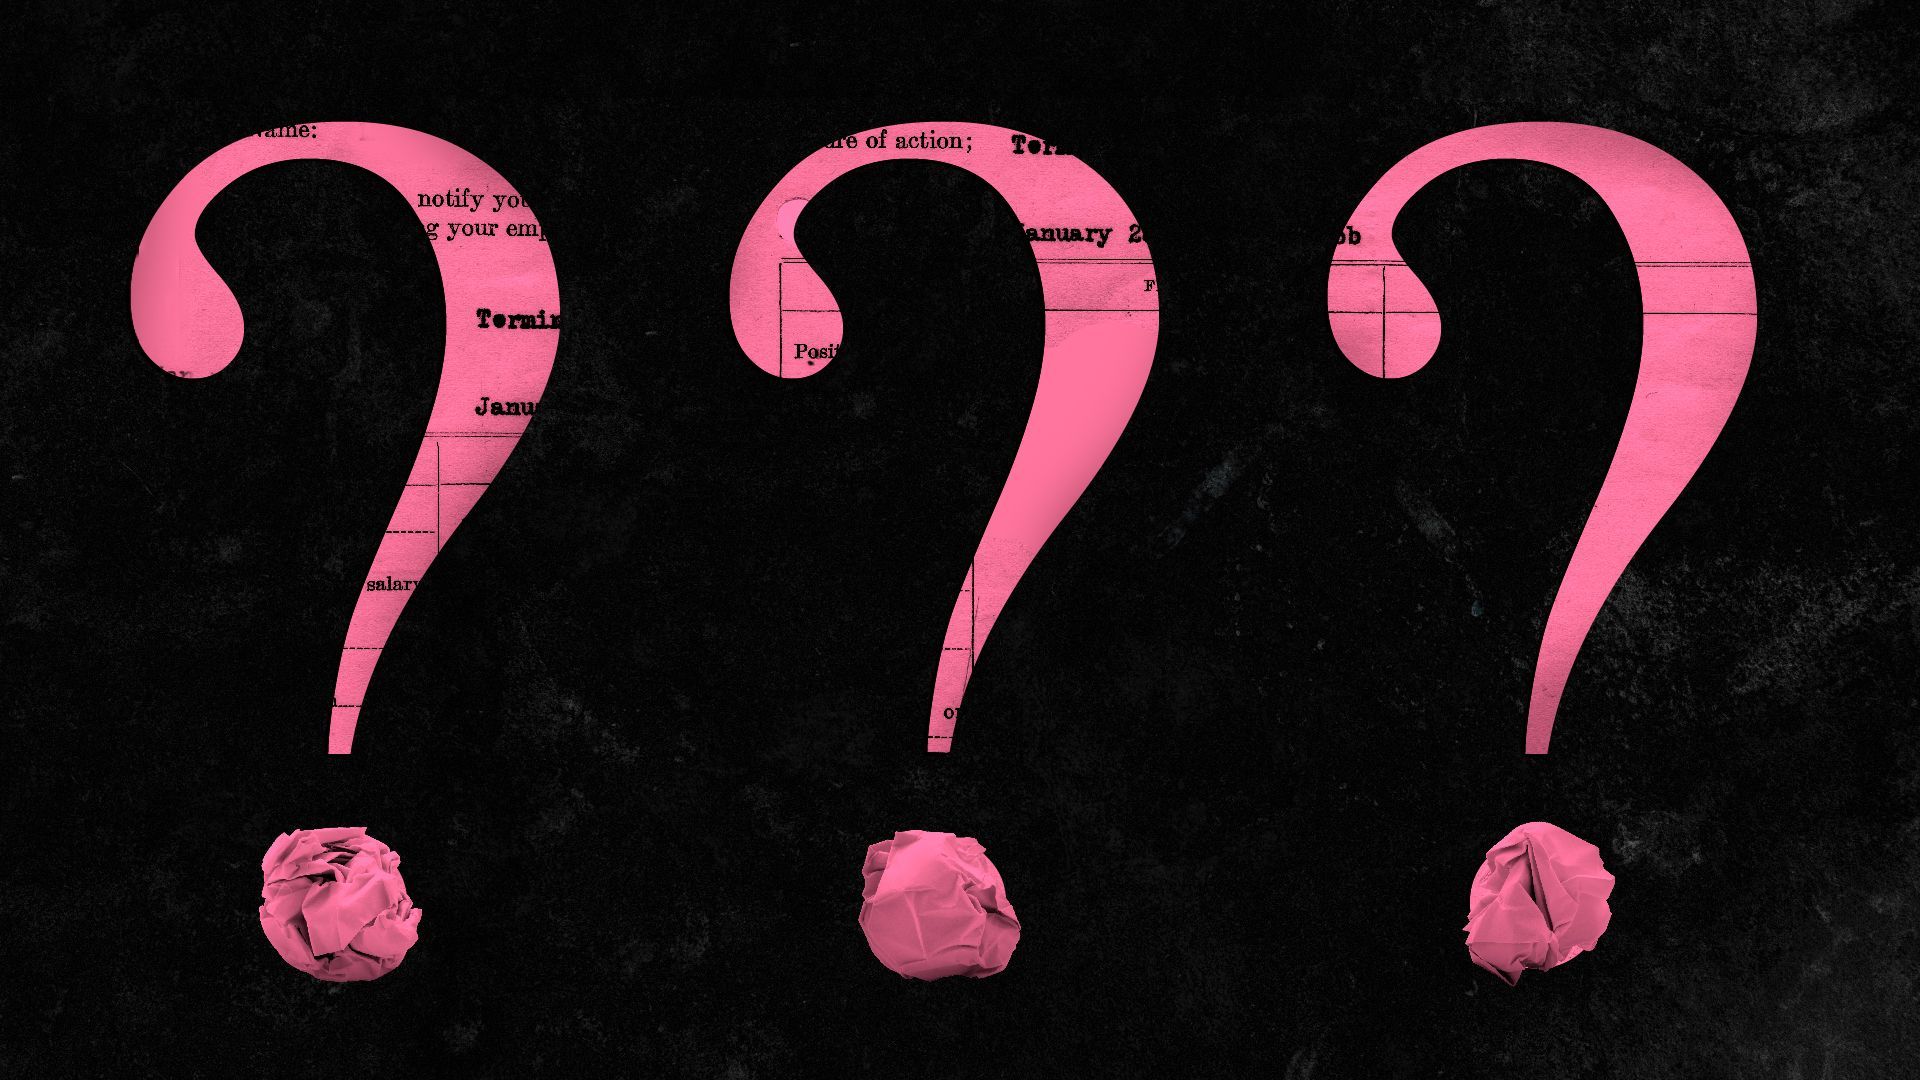 Illustration of three question marks made out of pink slips.